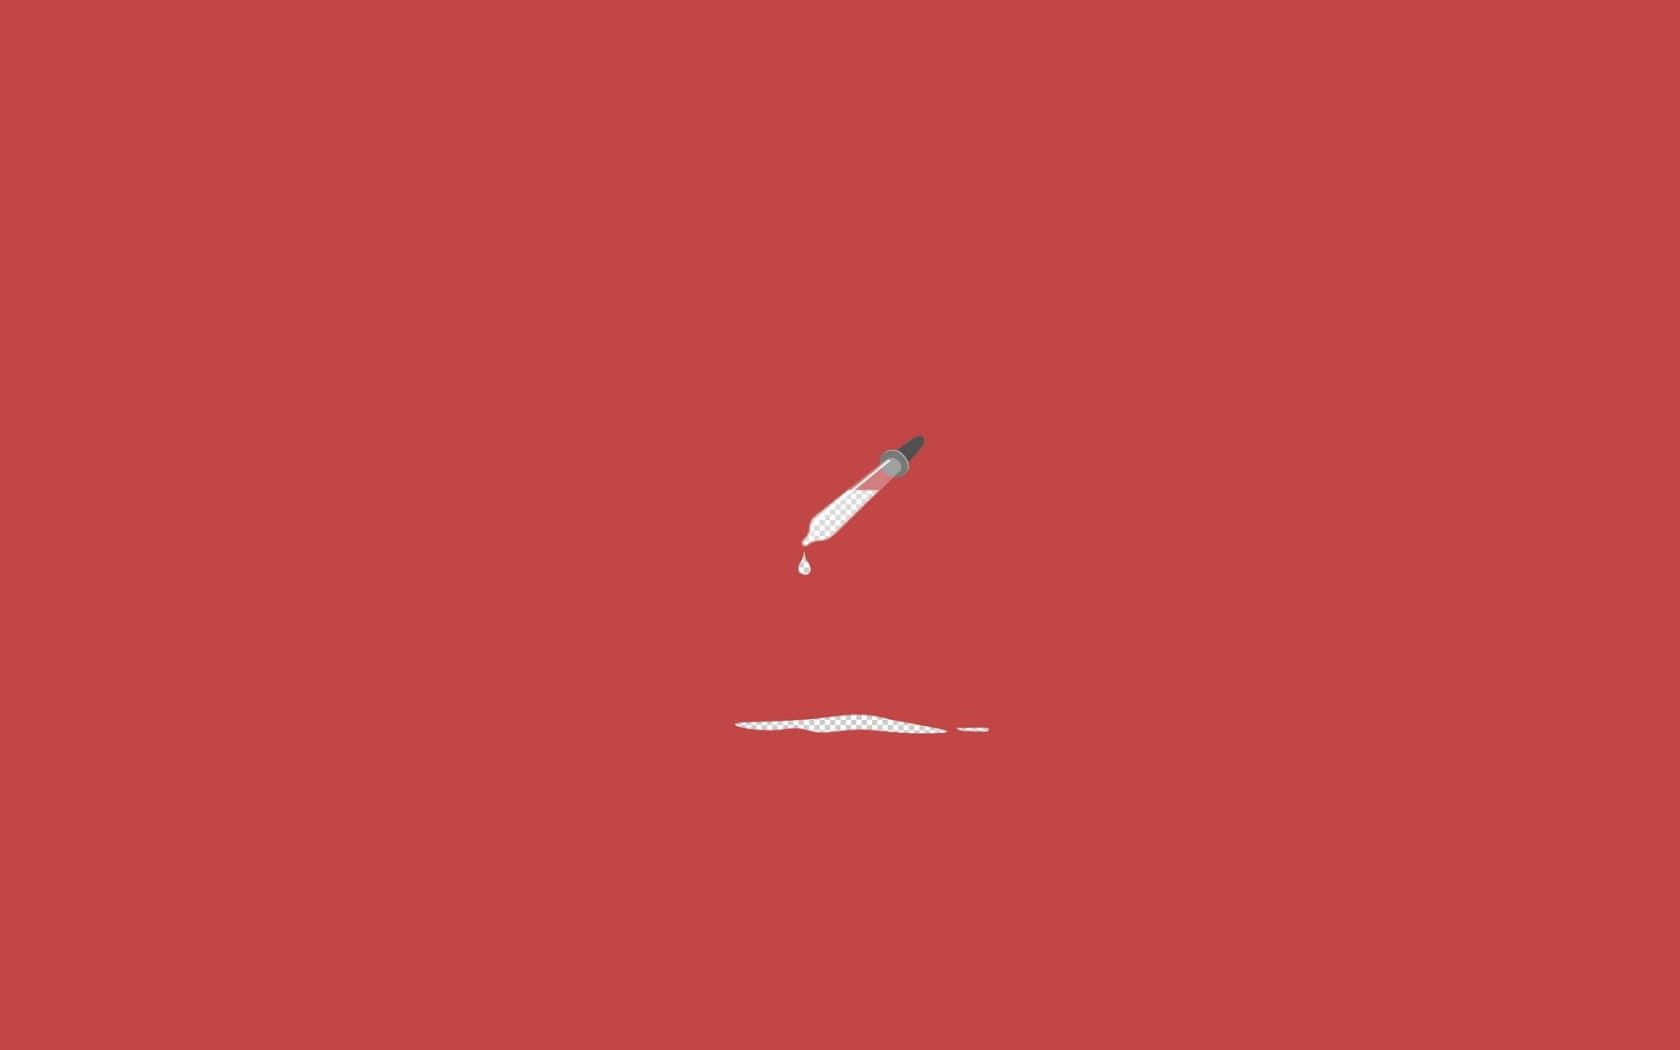 A Pen Is Laying On A Red Background